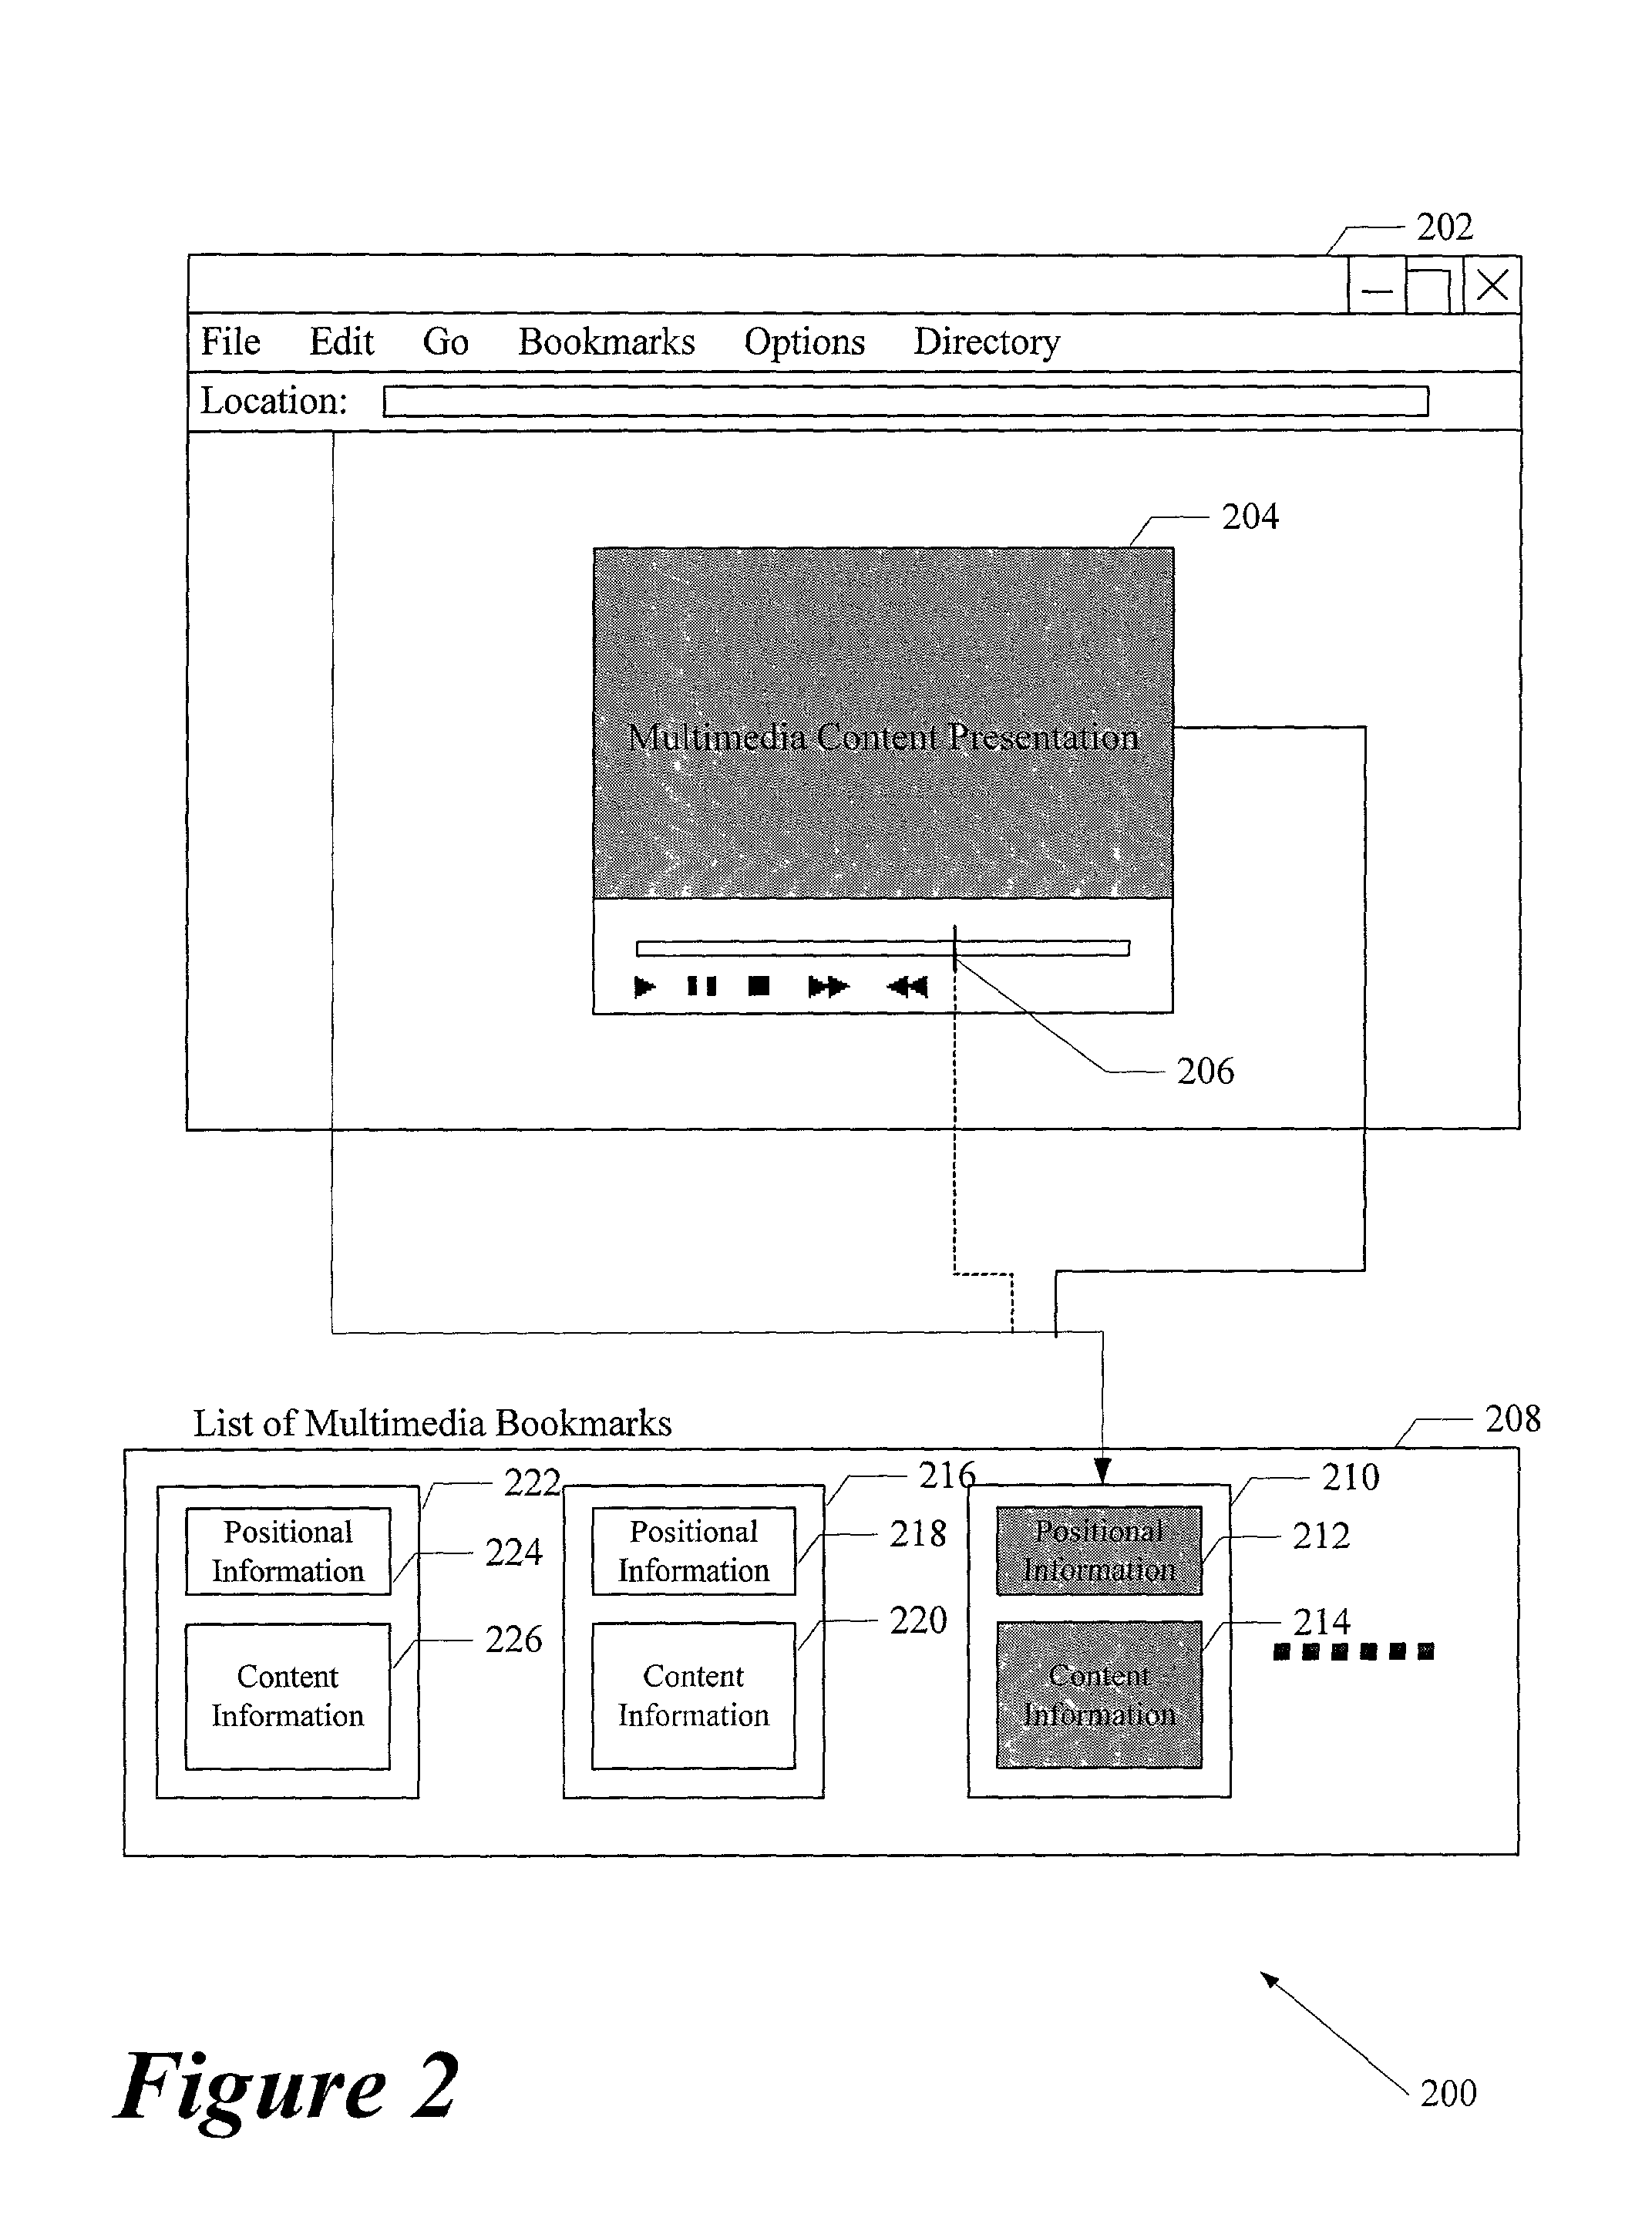 System and method for indexing, searching, identifying, and editing portions of electronic multimedia files